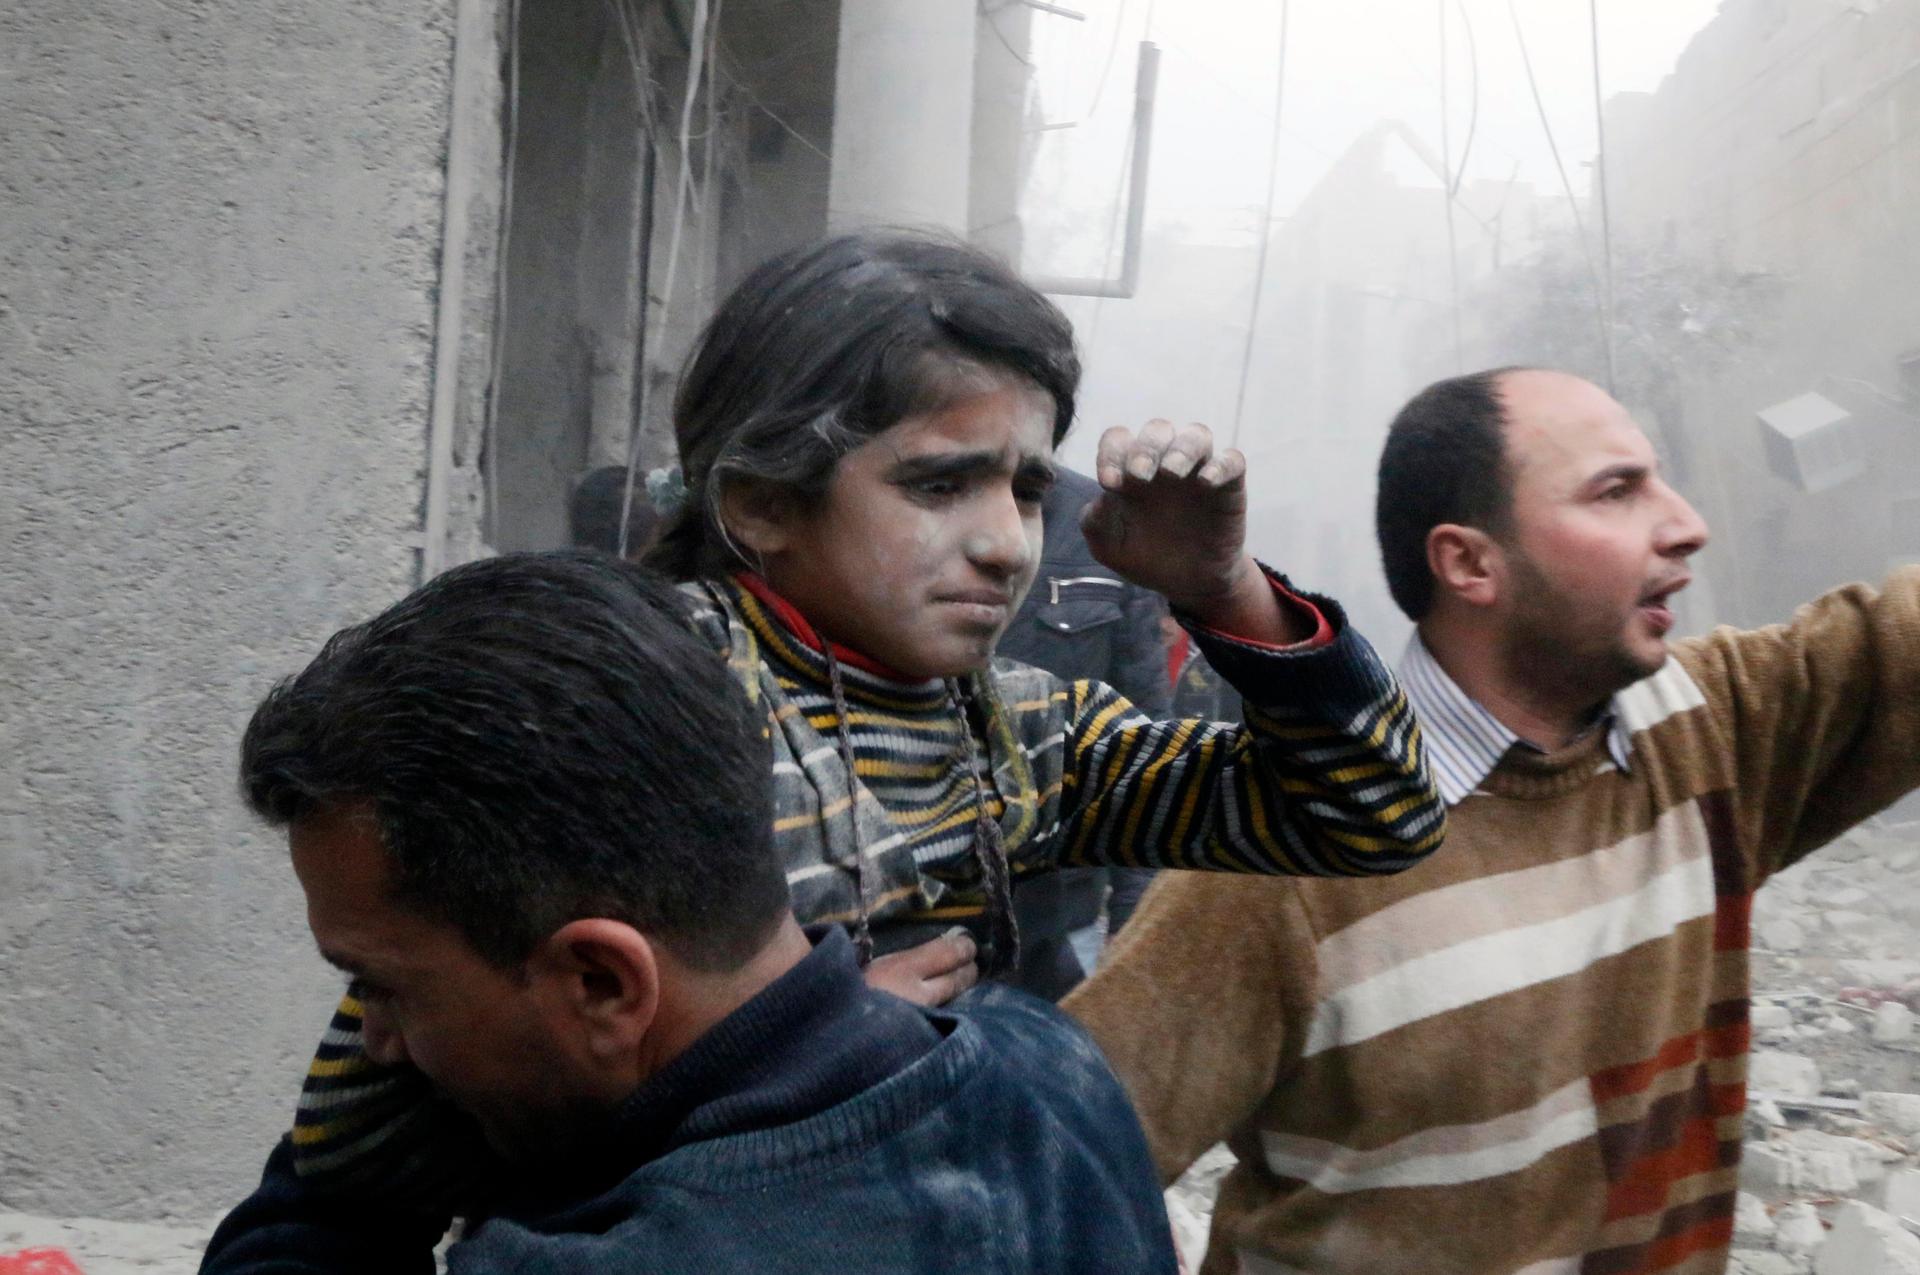 A Syrian girl is rescued from a damaged building after both of her parents died in what activists said was a government air strike.